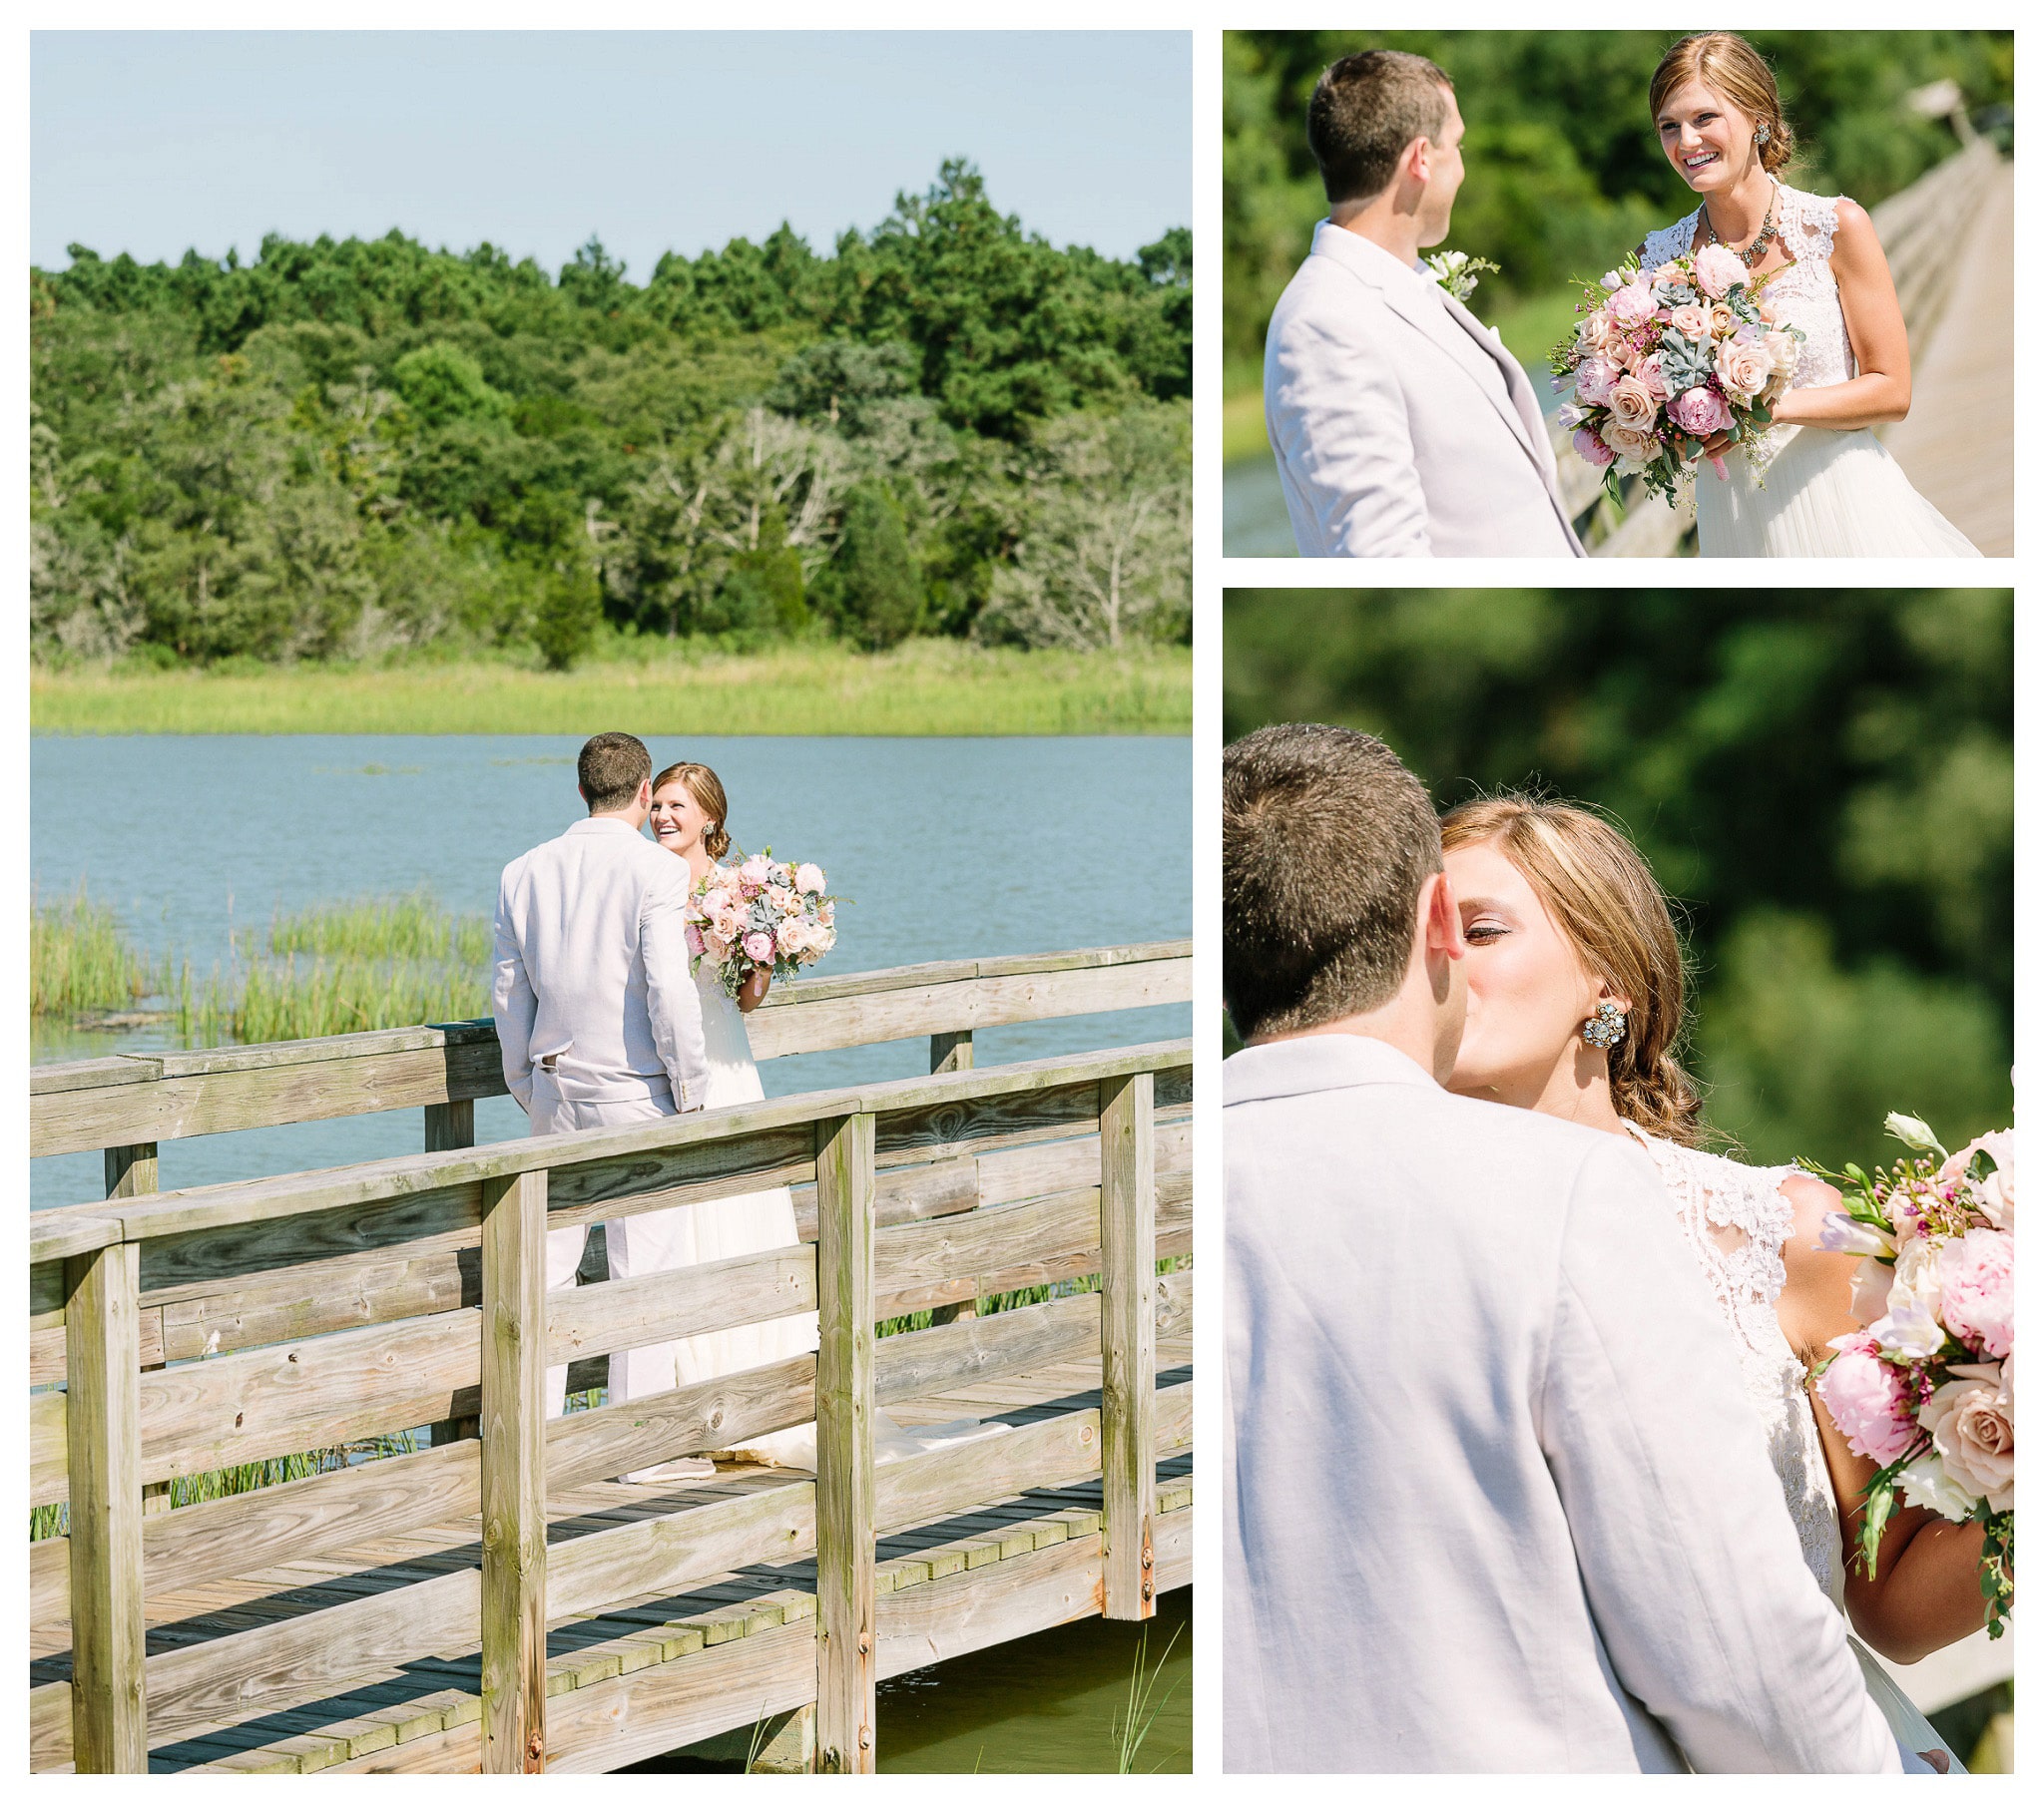 The Bride and Groom, By the Water, on a wooden walkway - Venue - Beach House Gulf Stream Breeze, Beach Realty Catering and Cake - Buttercream Cakes and Catering, LLC Flowers - Callas Florist Event Rentals - Event Works DJ - Scott Shaw